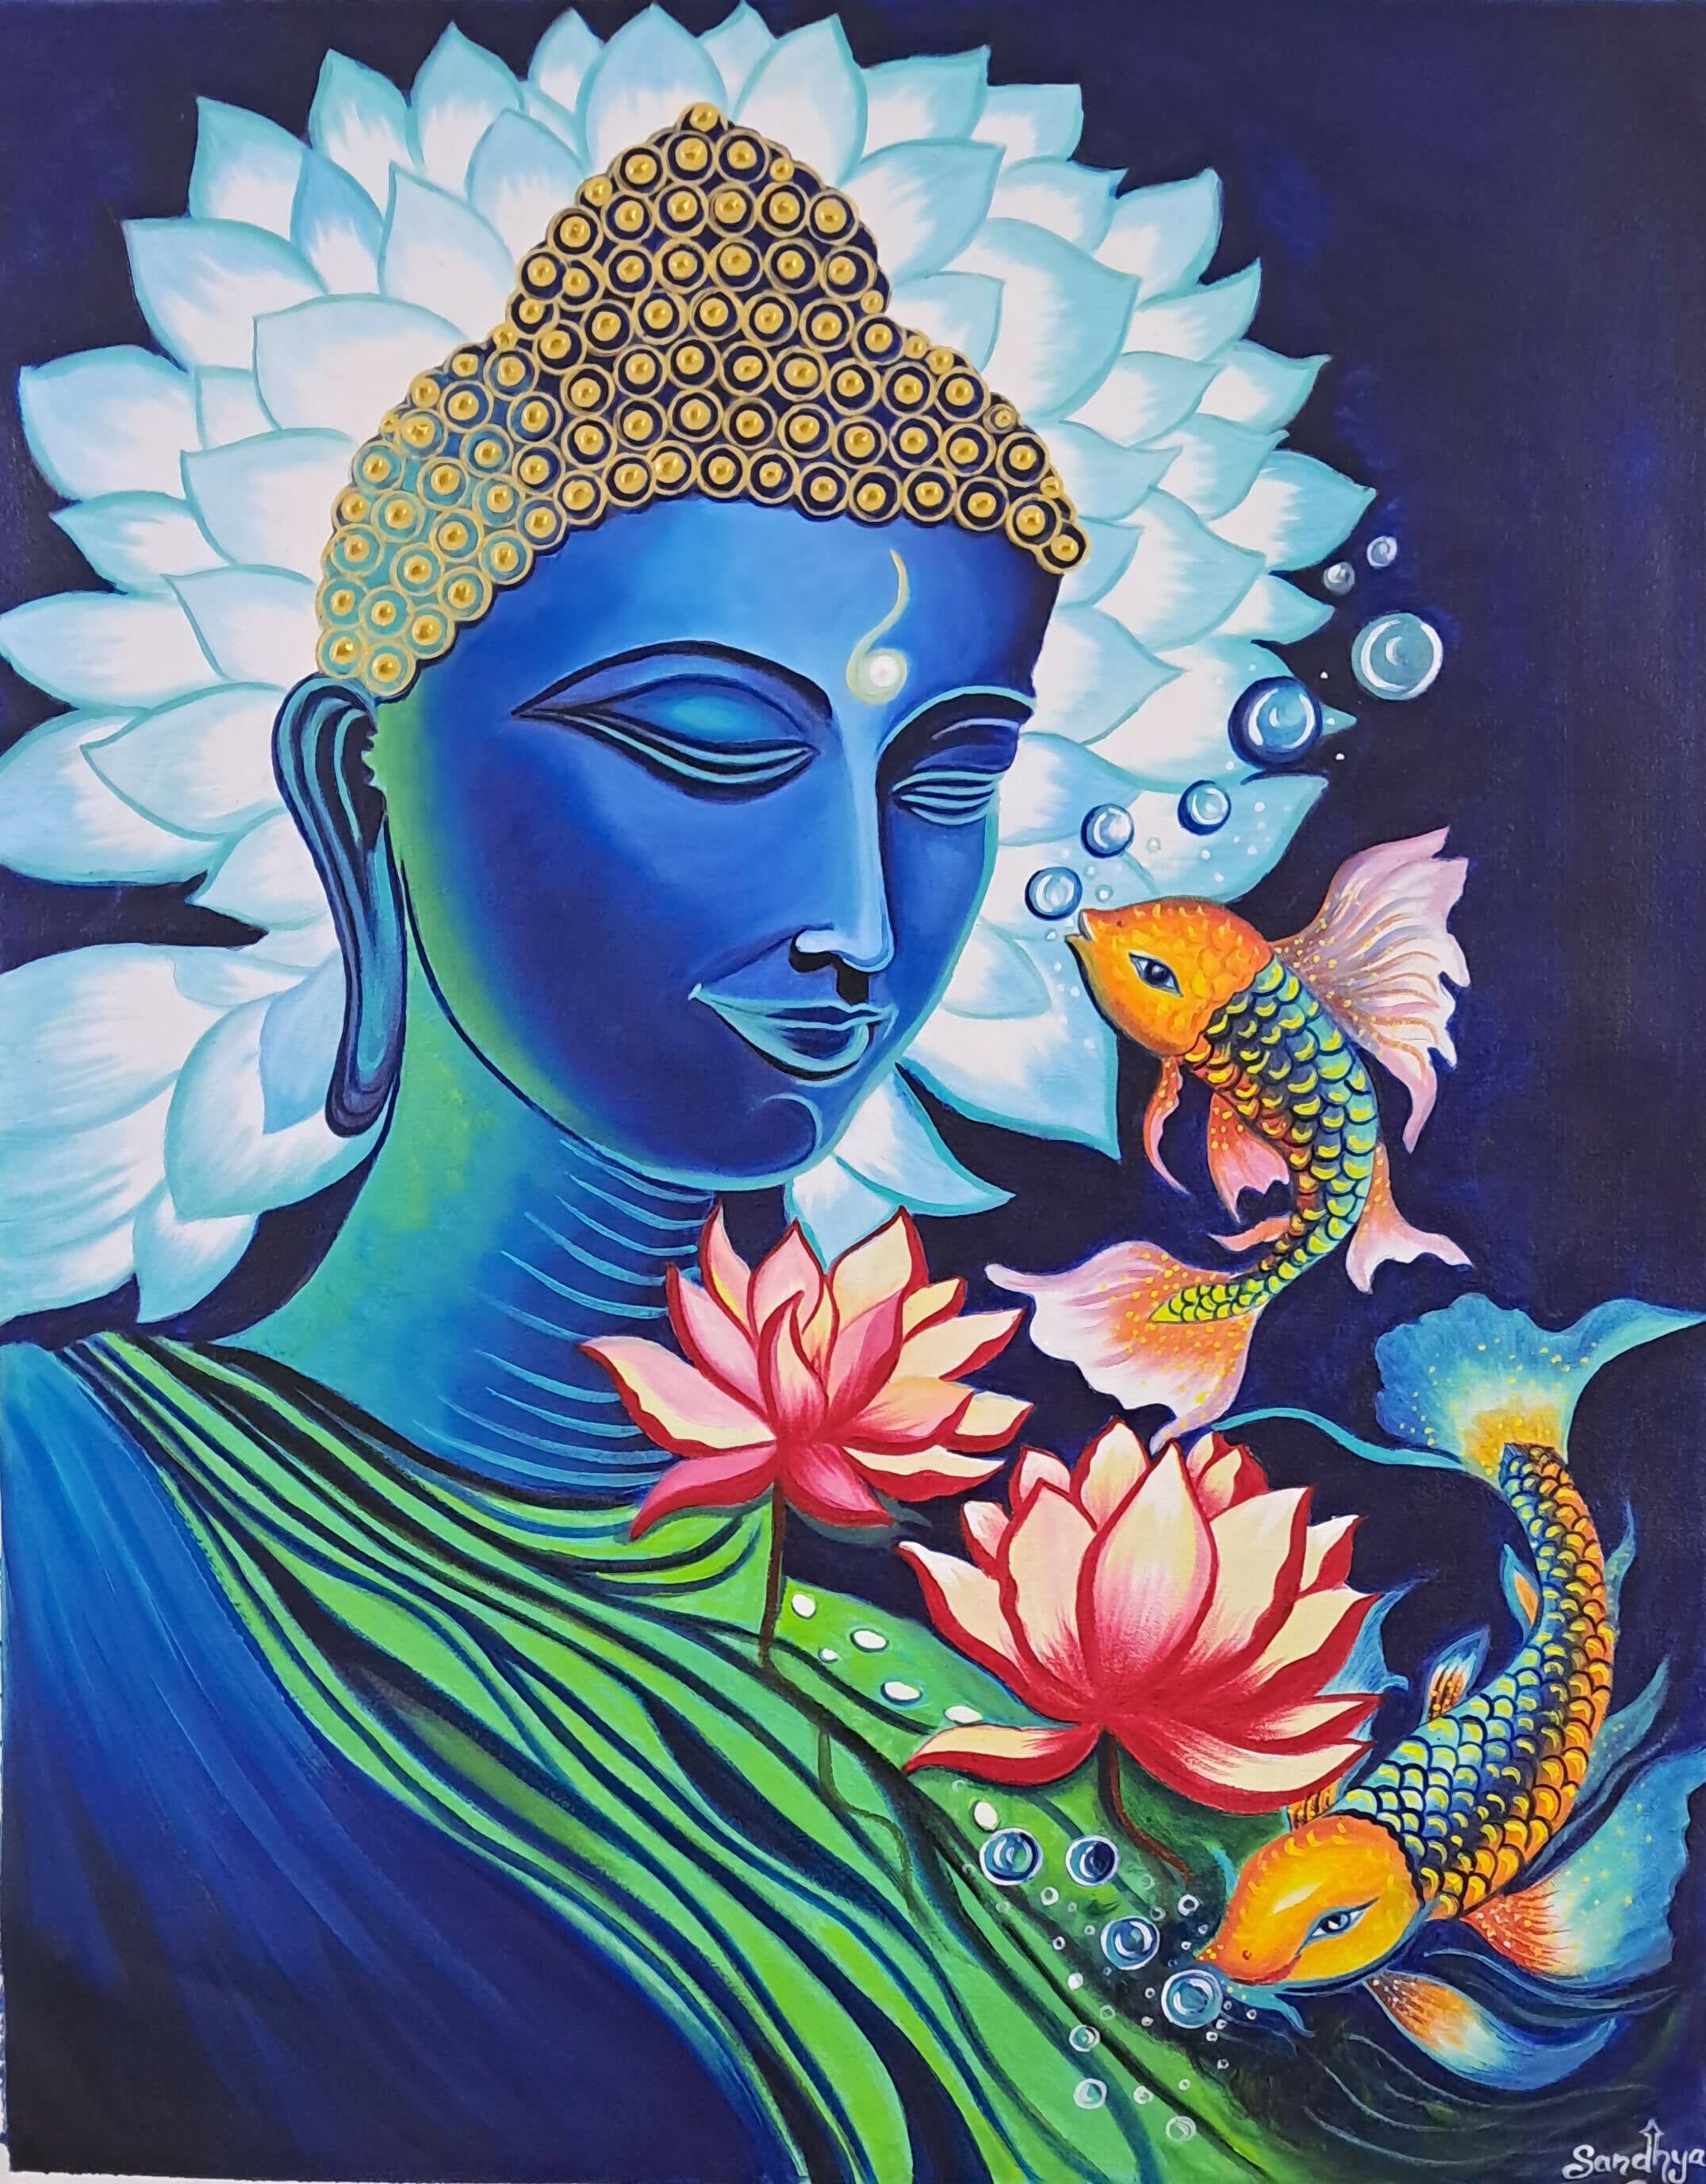 Captivating Lord Buddha Artistry Beneath a Sea of Colorful Fish